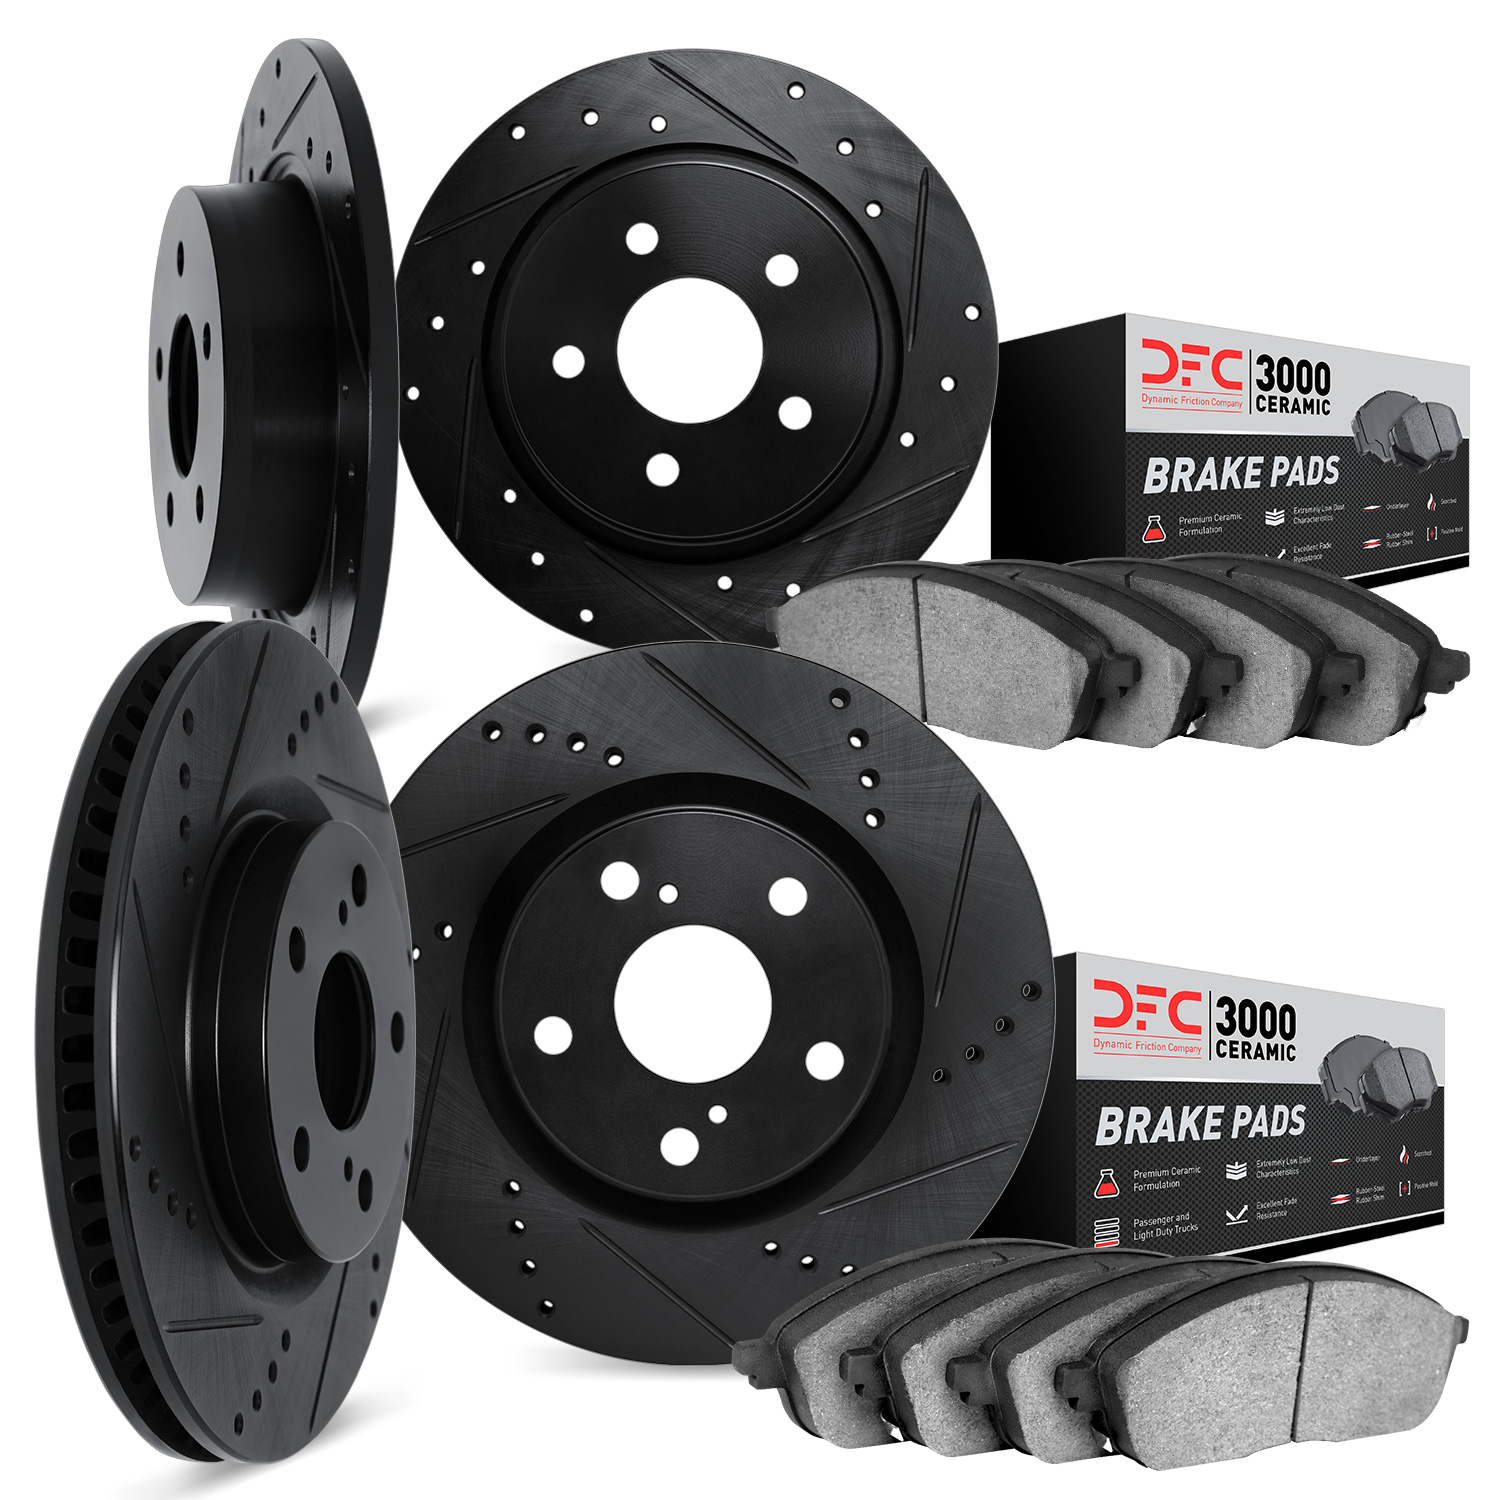 8304-46013 Drilled/Slotted Brake Rotors with 3000-Series Ceramic Brake Pads Kit [Black], 2003-2003 GM, Position: Front and Rear